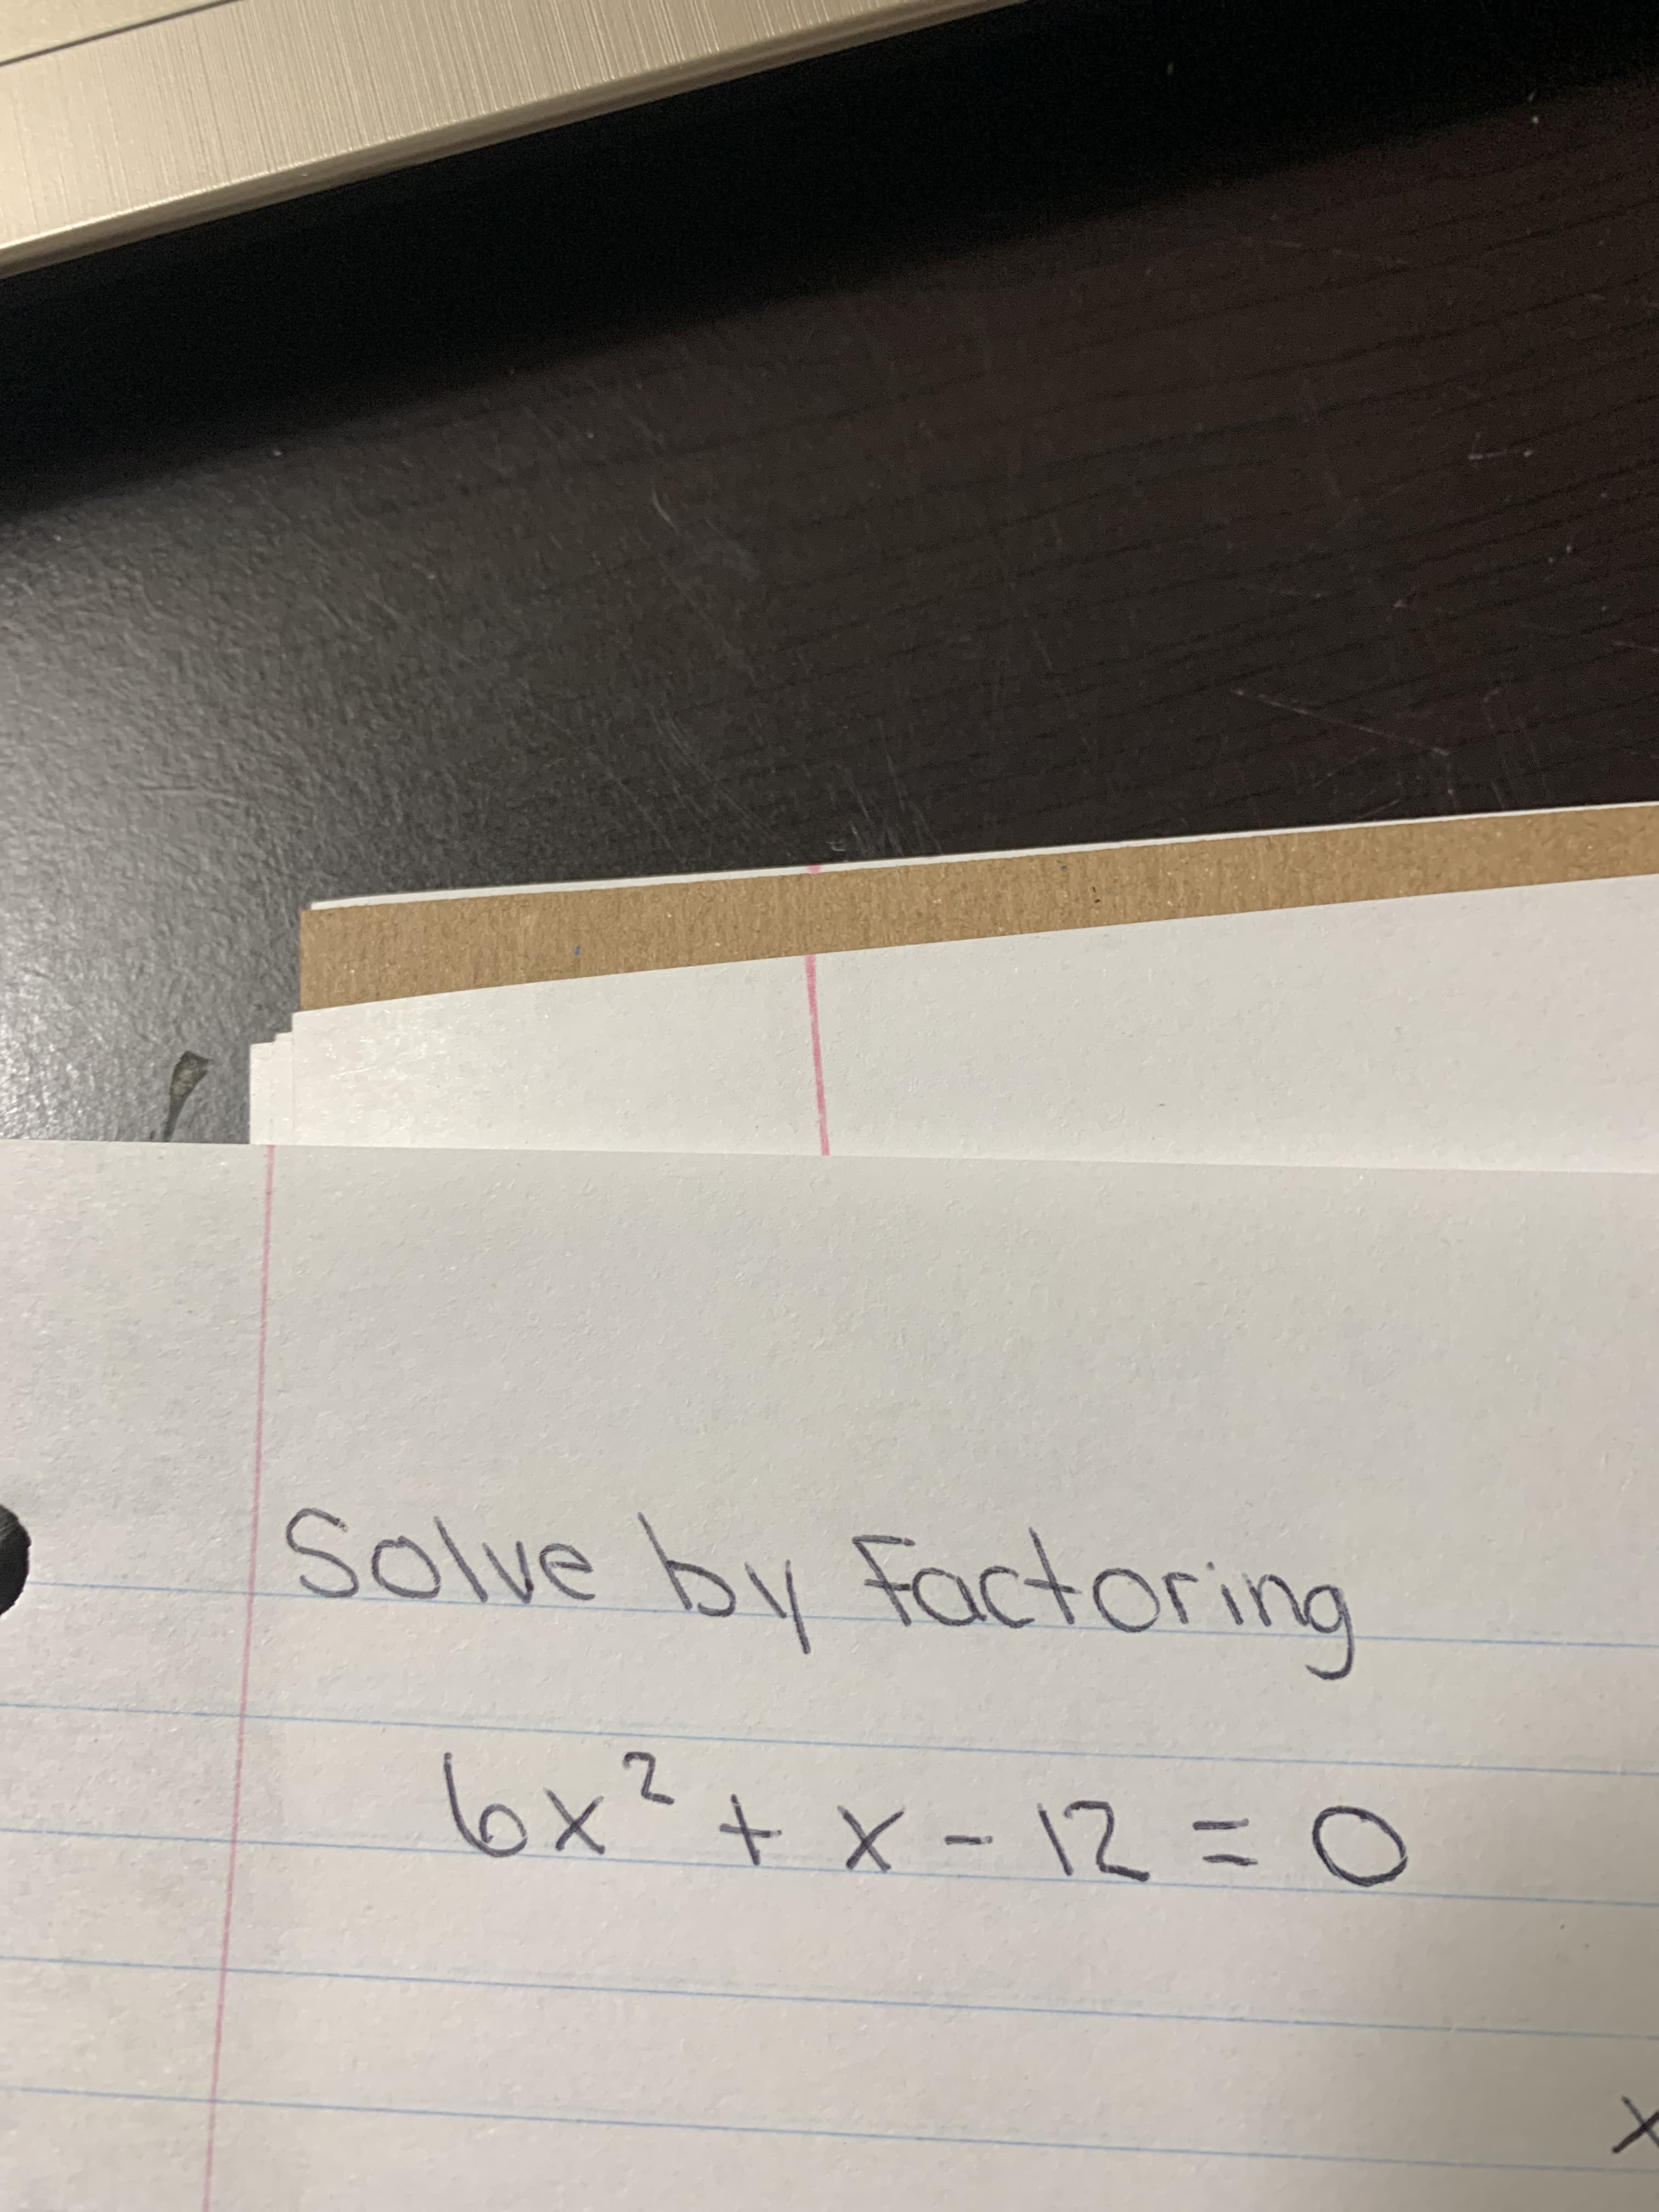 Solve by factoring
O= Zl-X t,
